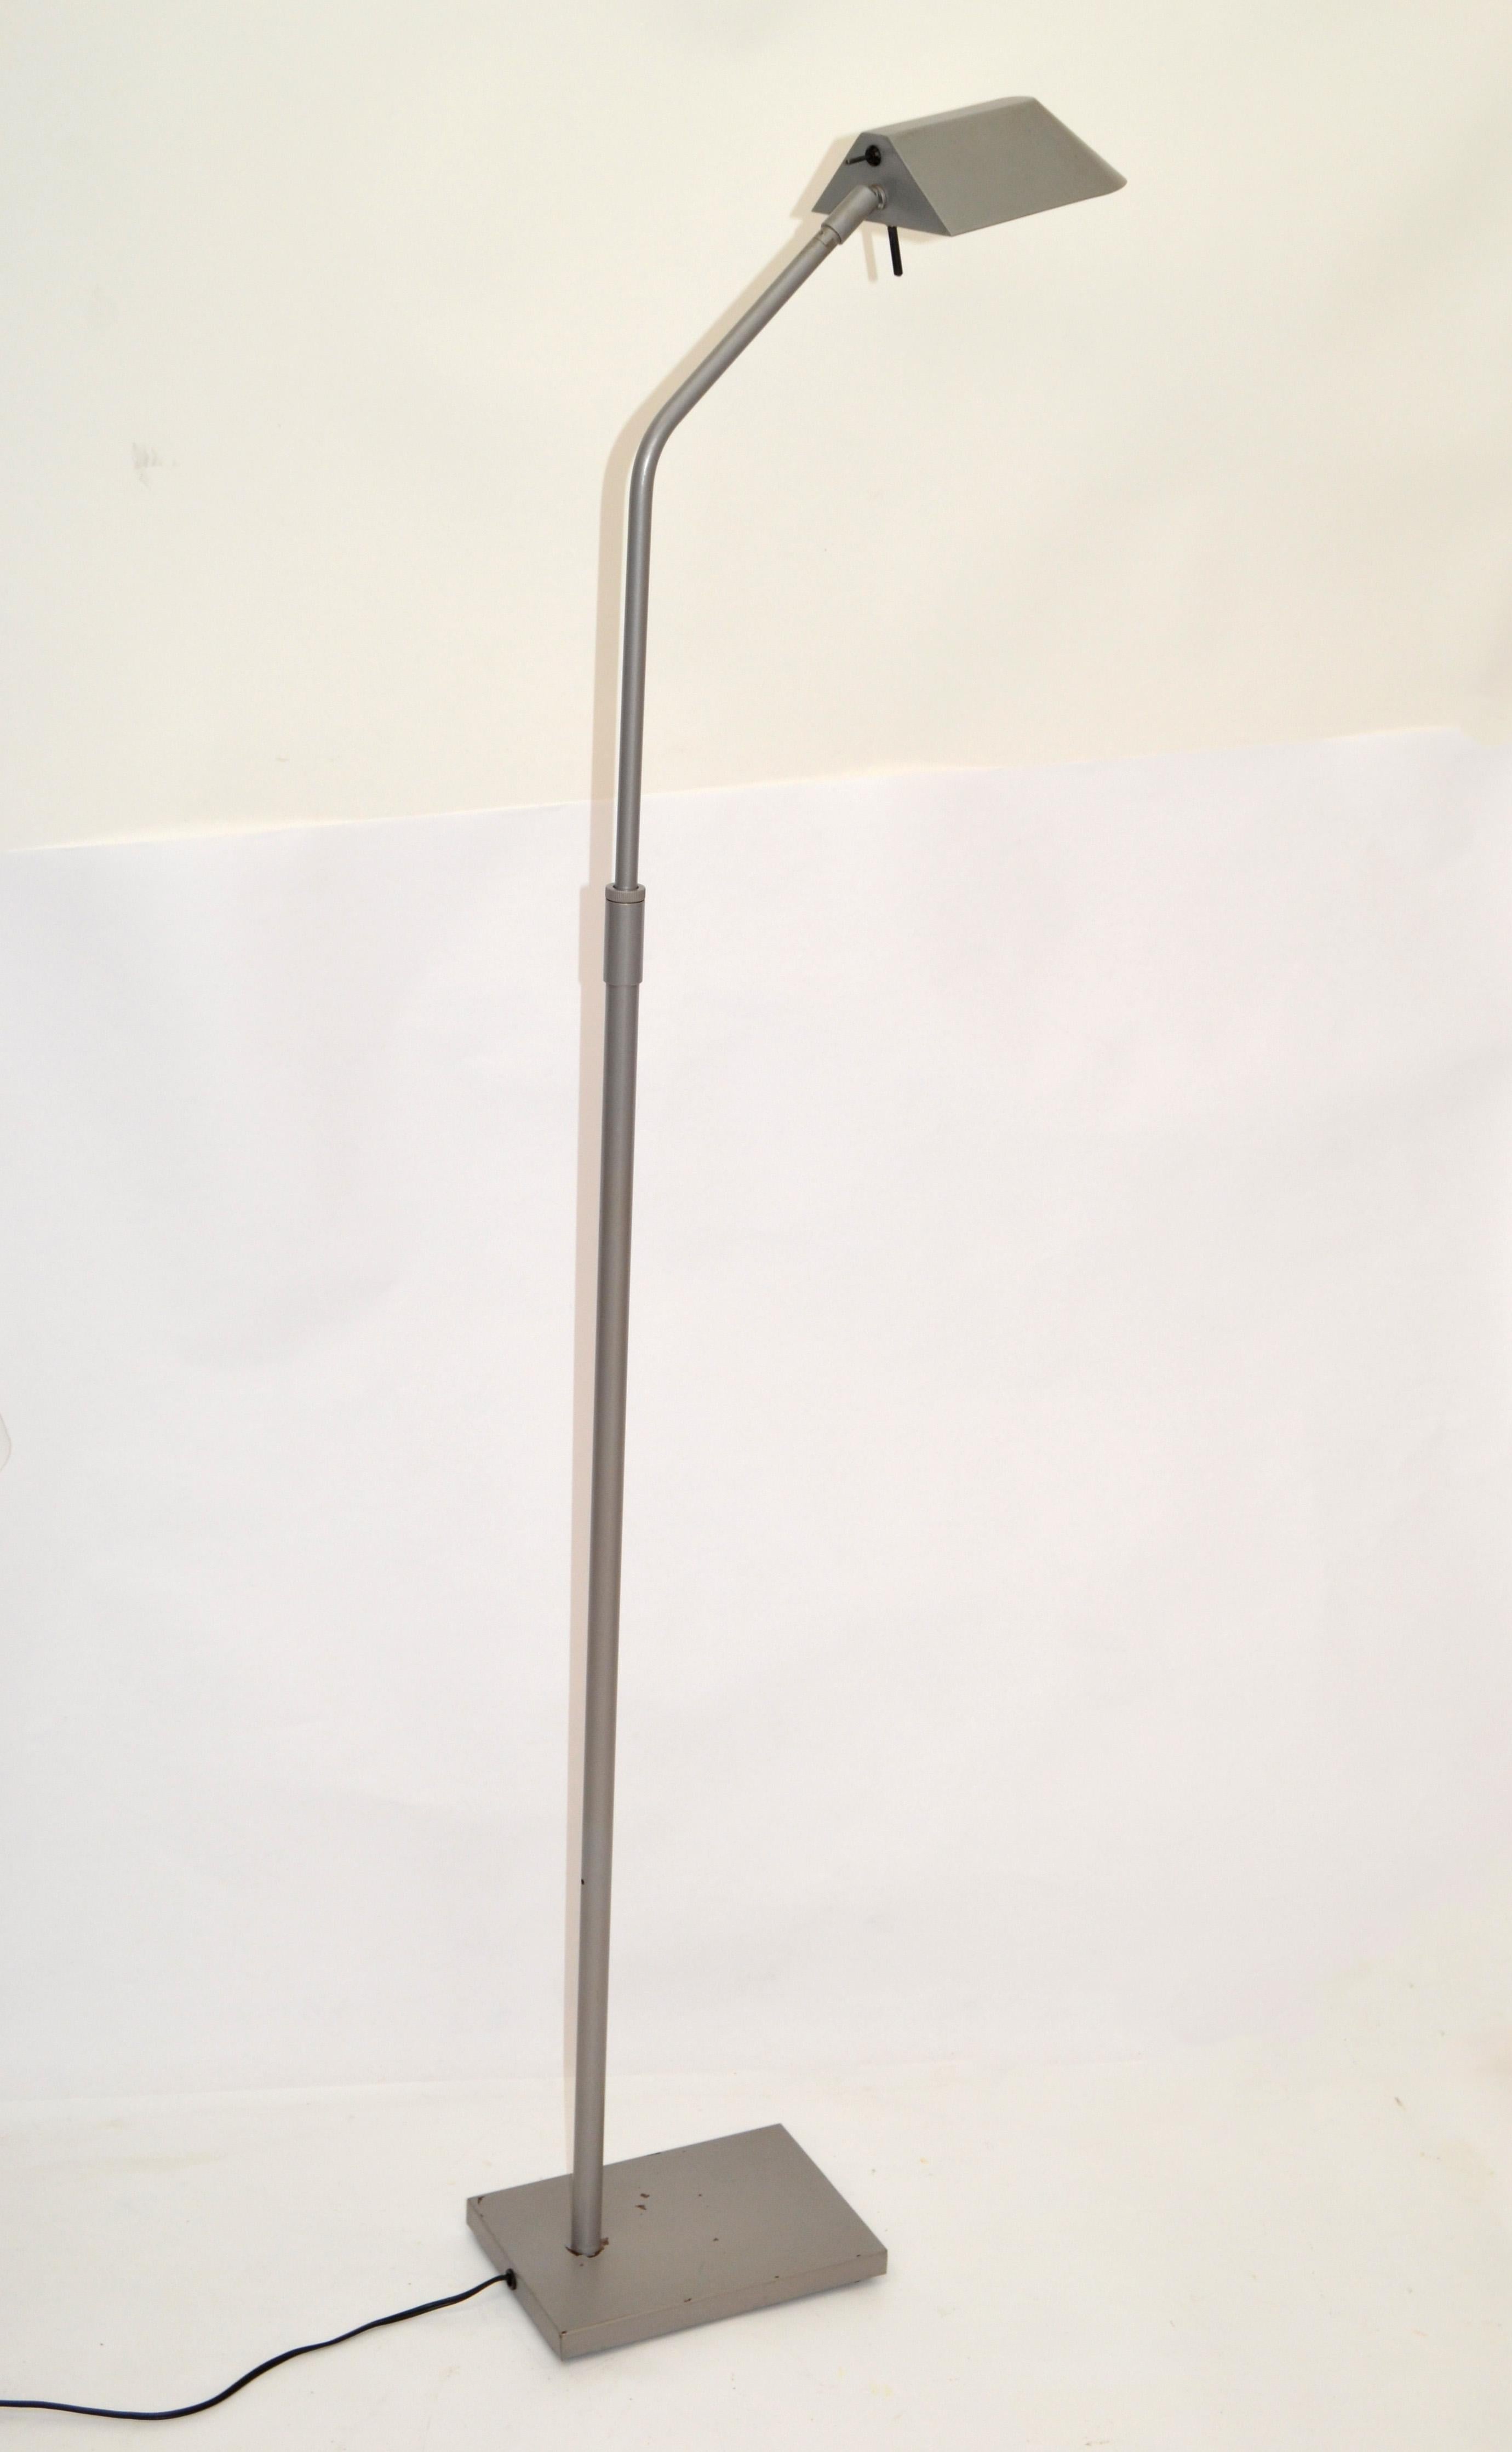 Elegant adjustable Steel floor lamp in Silver Finish from the 1987 designed by Robert Sonneman and made by George Kovacs Lighting.
Uses a Halogen bulb with max. 40 watts.
Comes with a footswitch and is in perfect working condition.
Makers Mark at